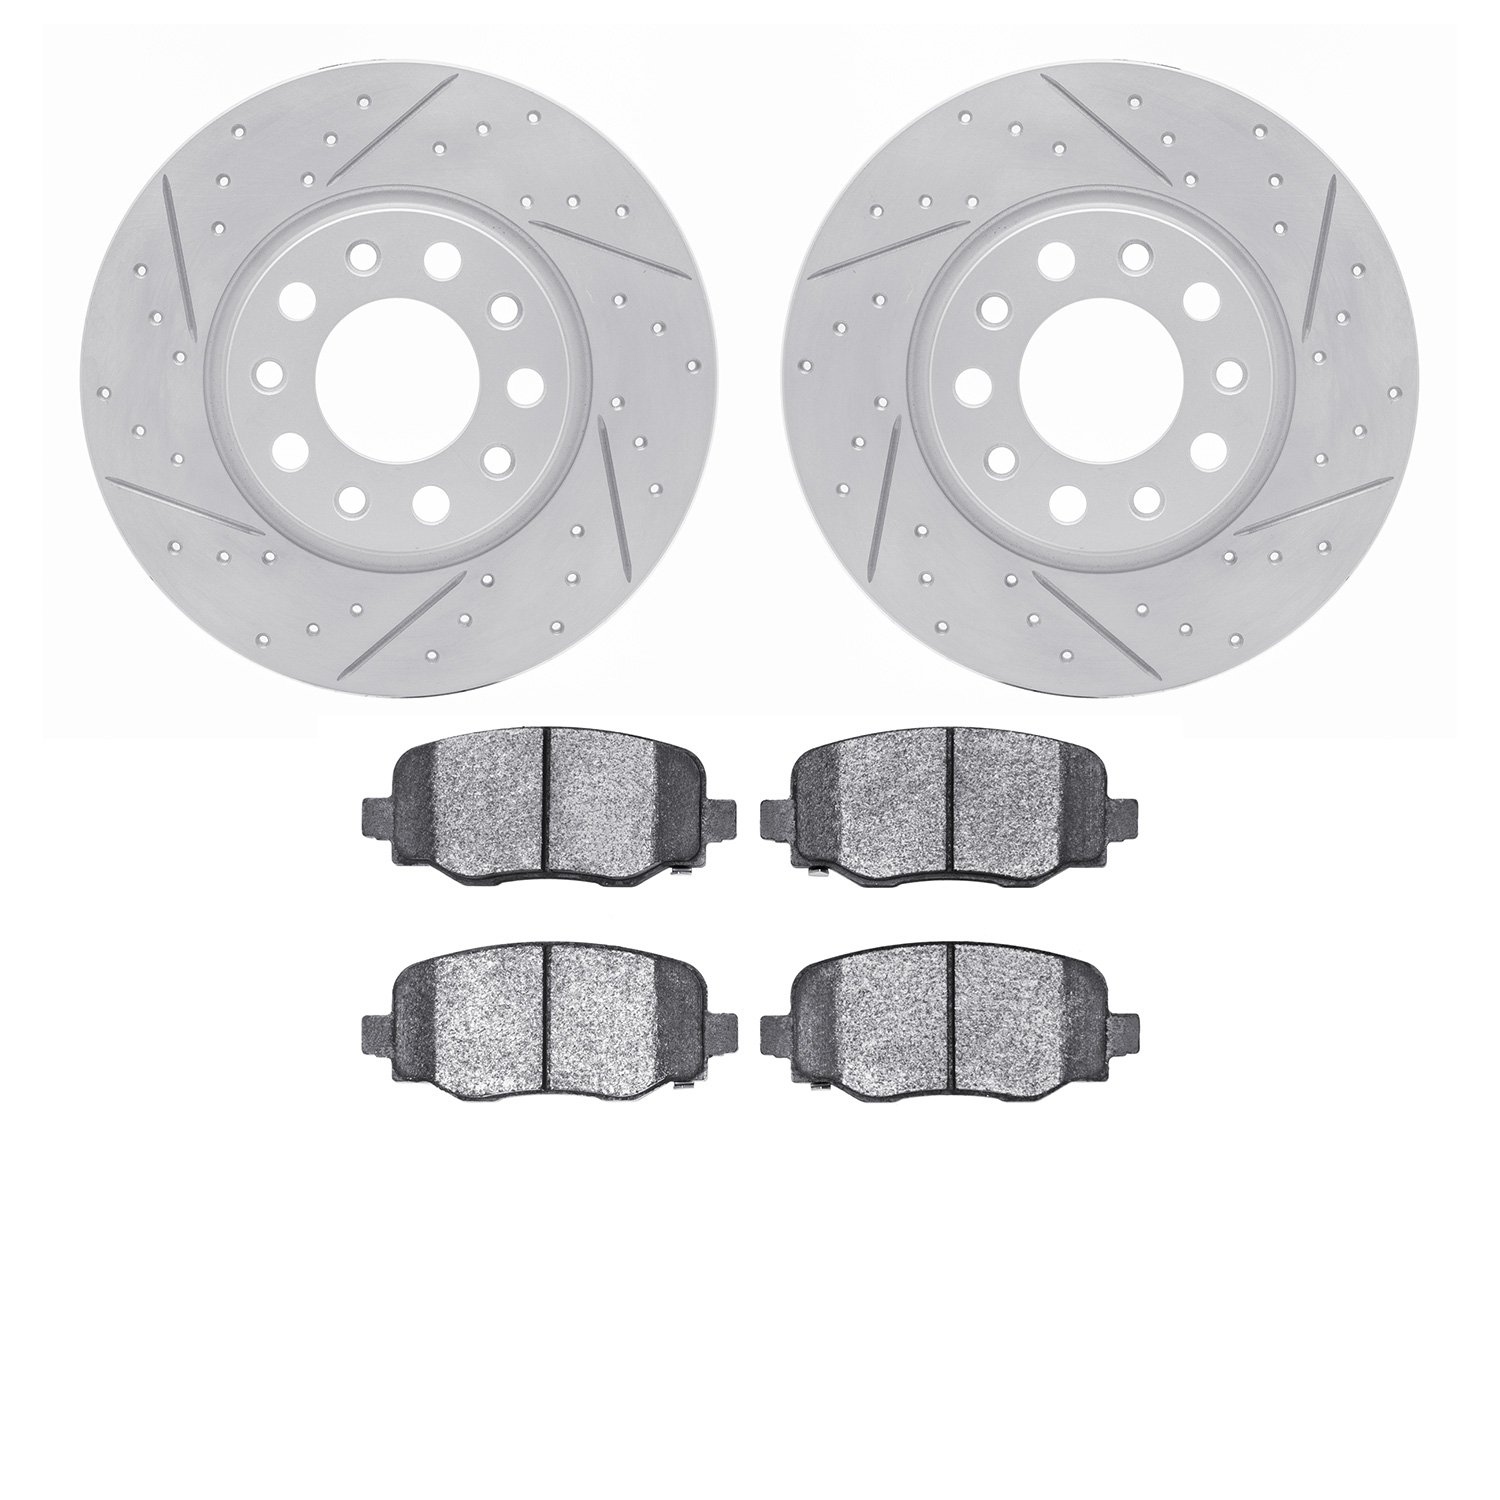 2402-42013 Geoperformance Drilled/Slotted Brake Rotors with Ultimate-Duty Brake Pads Kit, Fits Select Mopar, Position: Rear